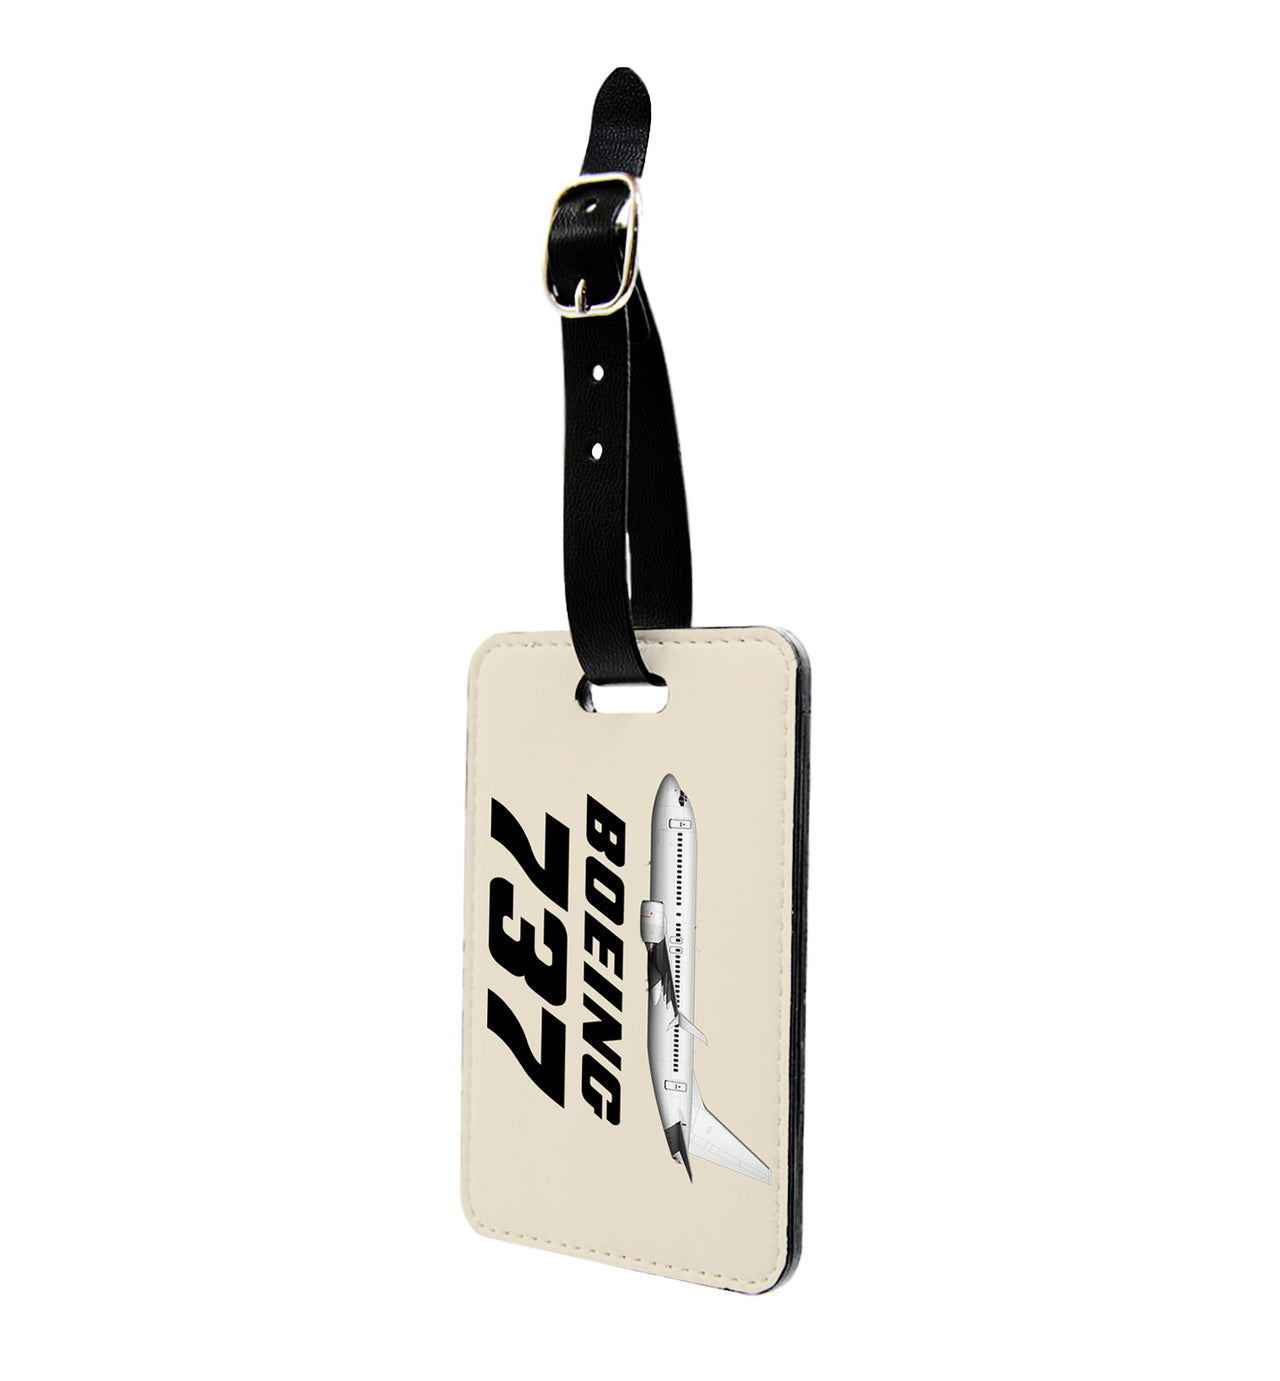 The Boeing 737 Designed Luggage Tag